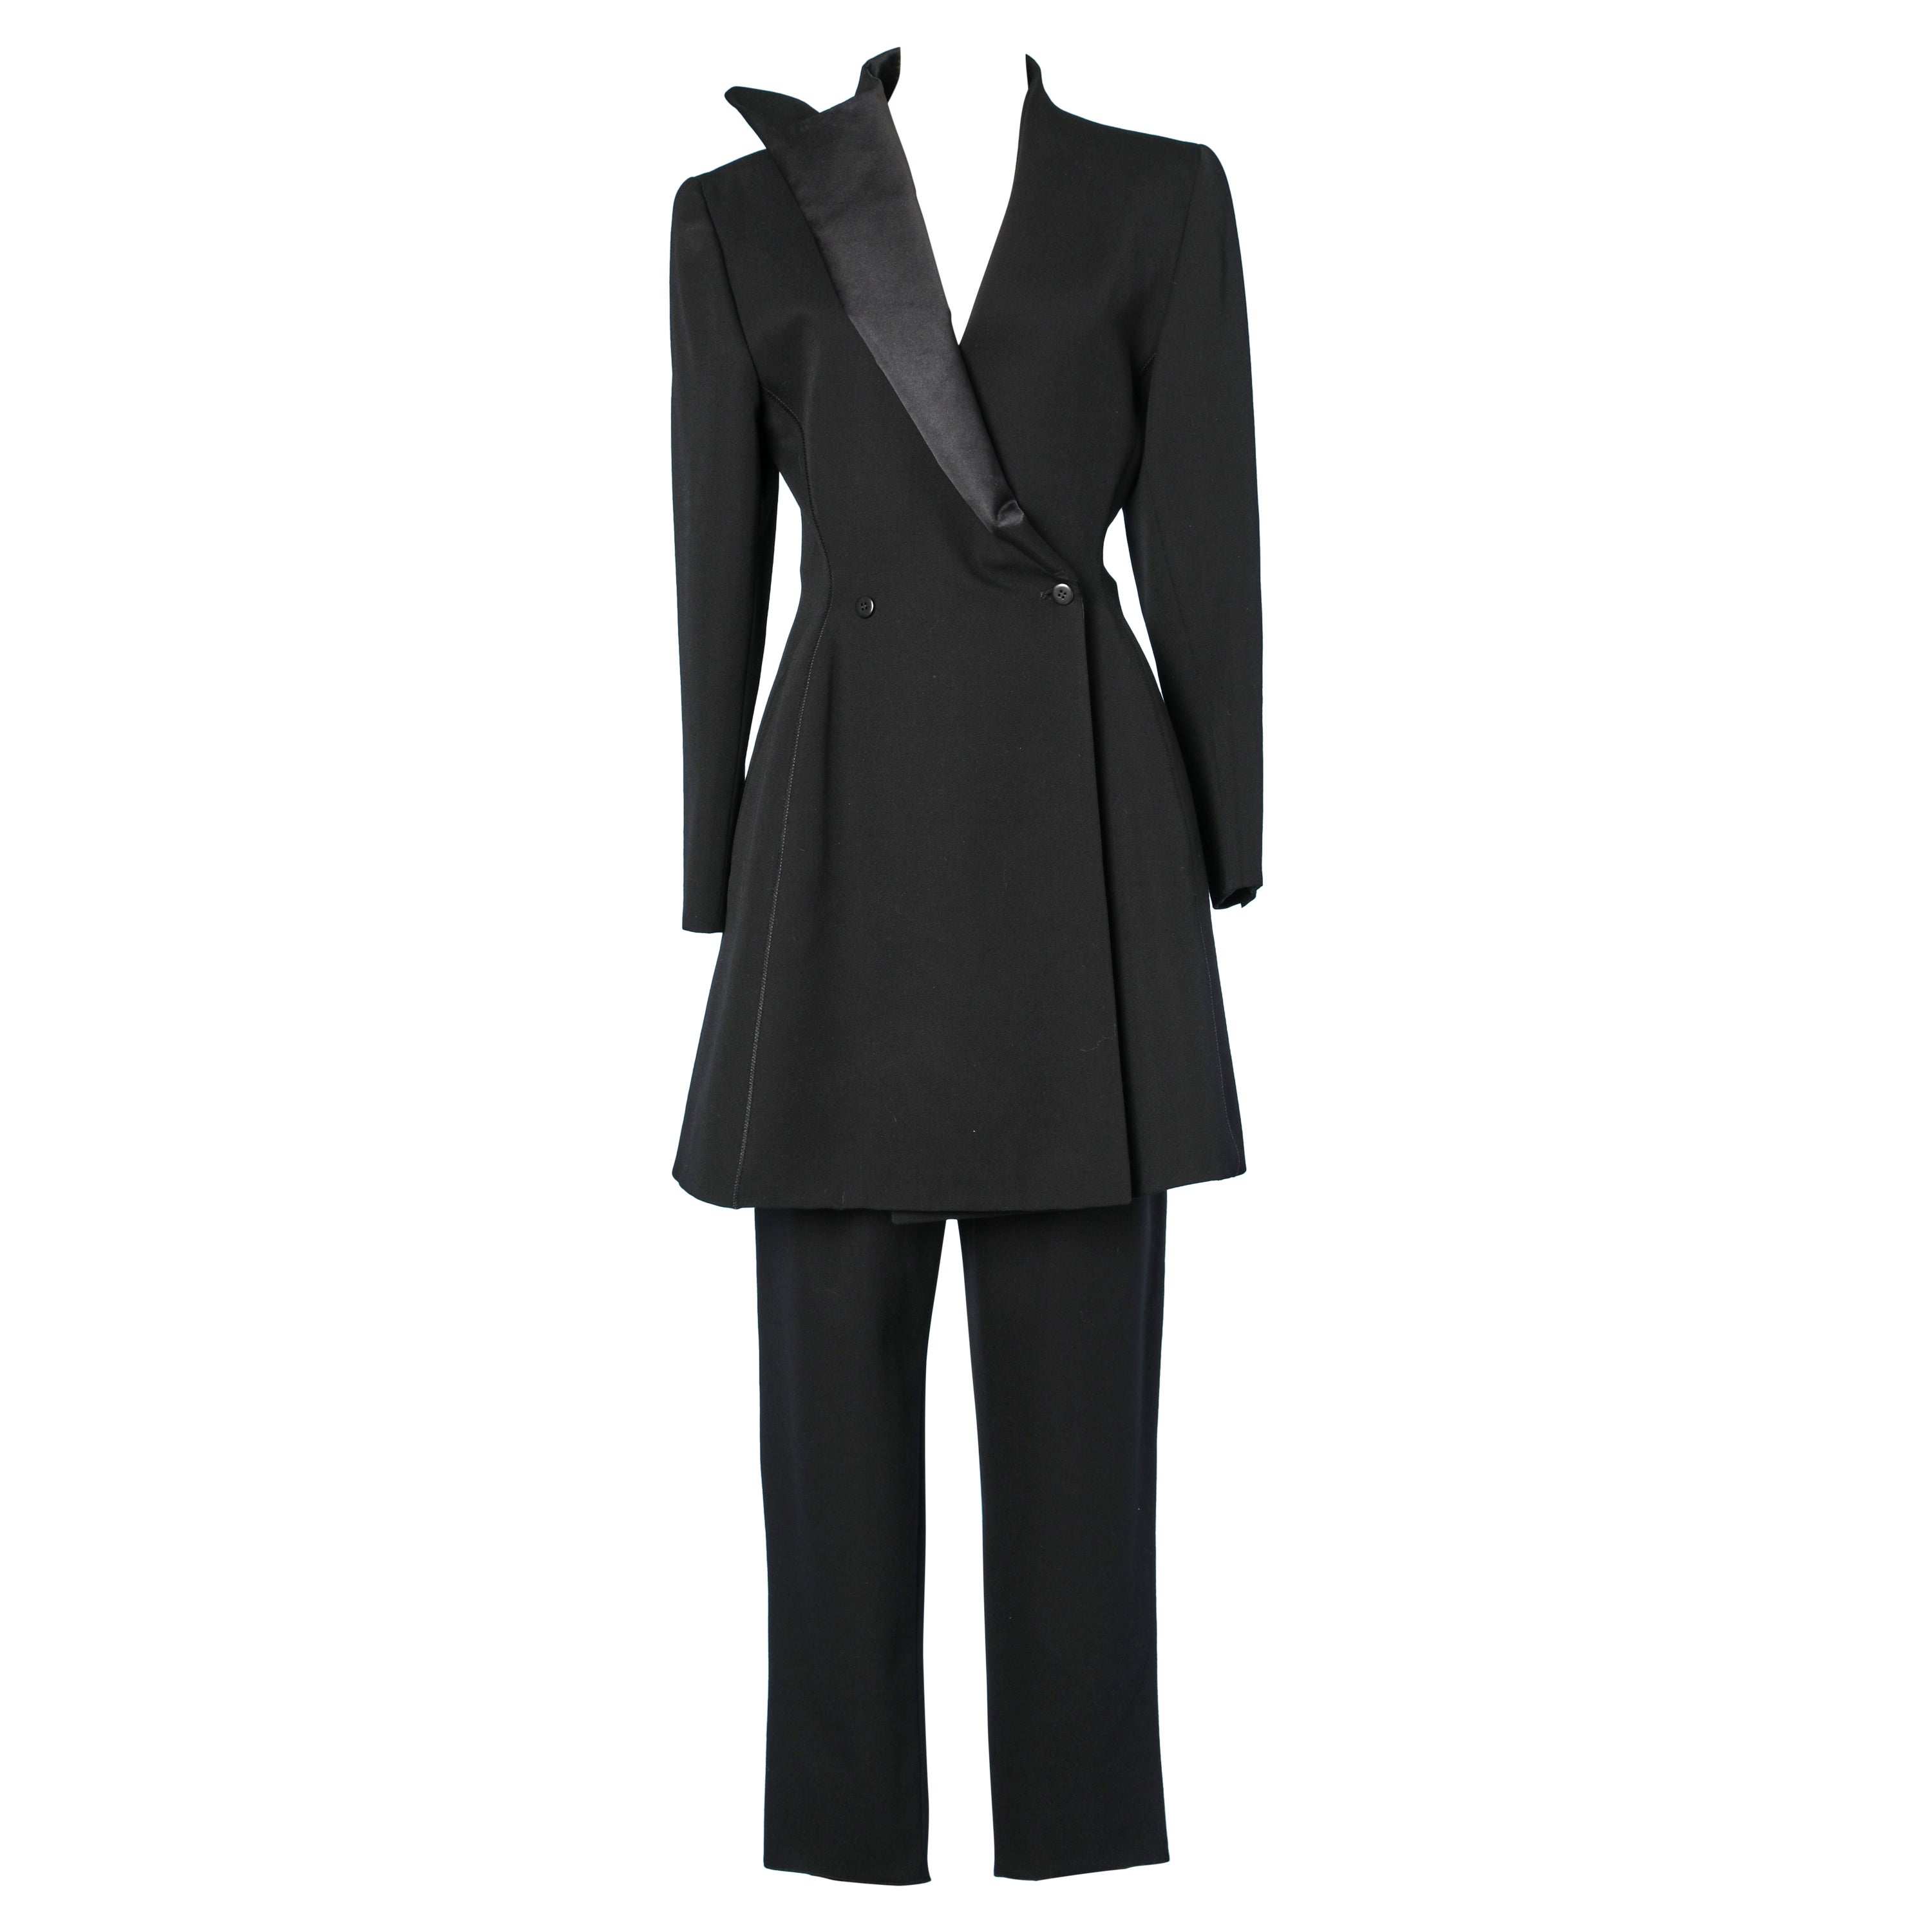 Black trouser pant suit in dry wool and graphic collar Claude Montana